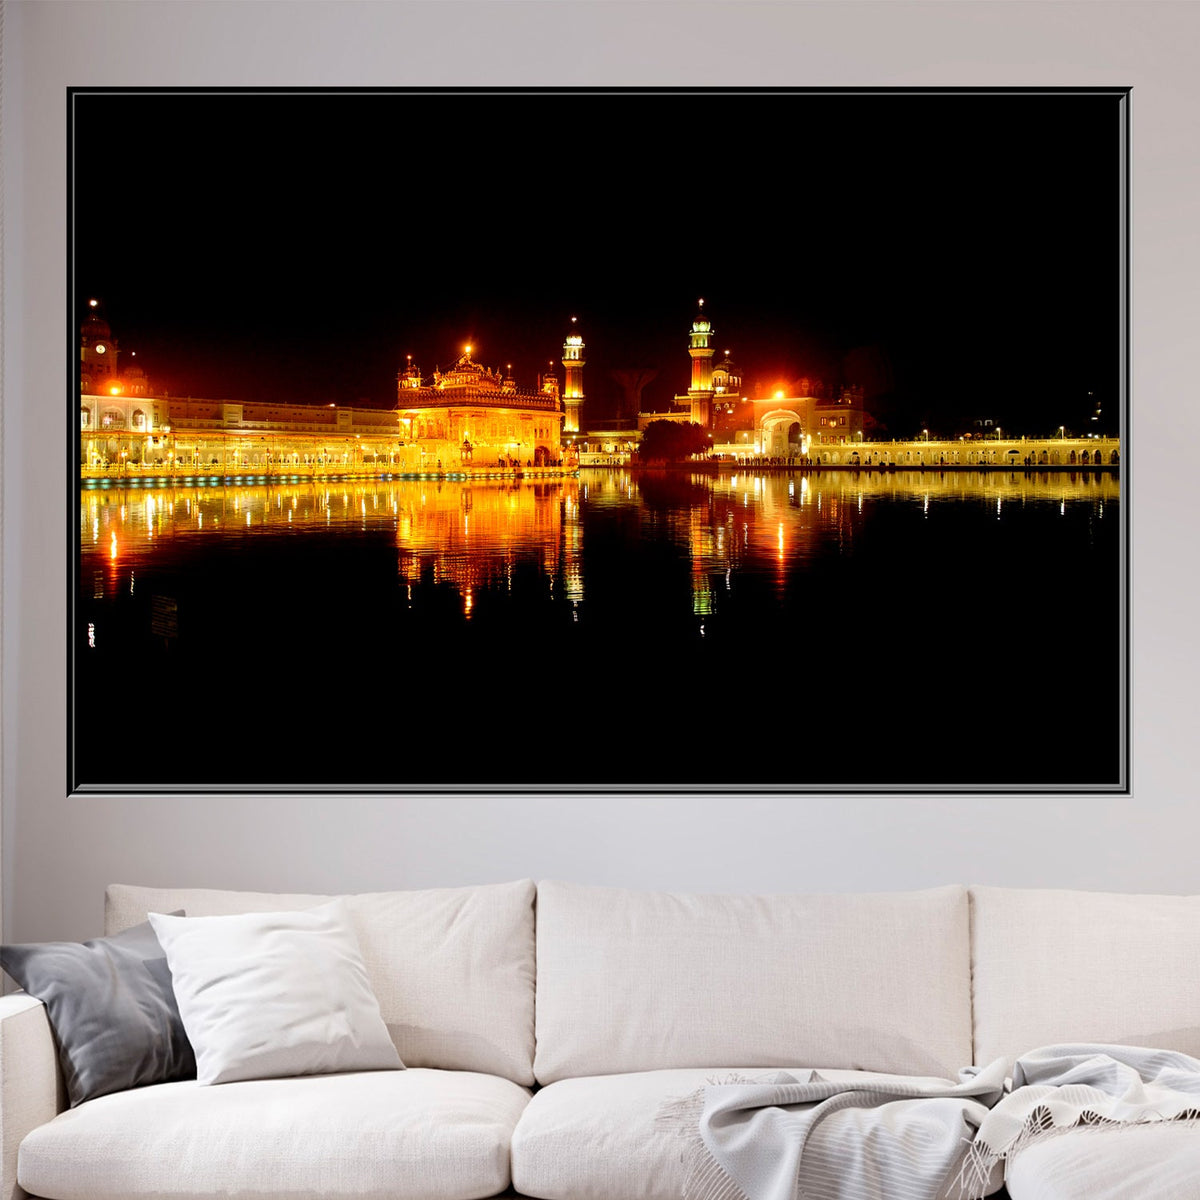 https://cdn.shopify.com/s/files/1/0387/9986/8044/products/TheIconicGoldenTempleCanvasArtprintFloatingFrame-1.jpg